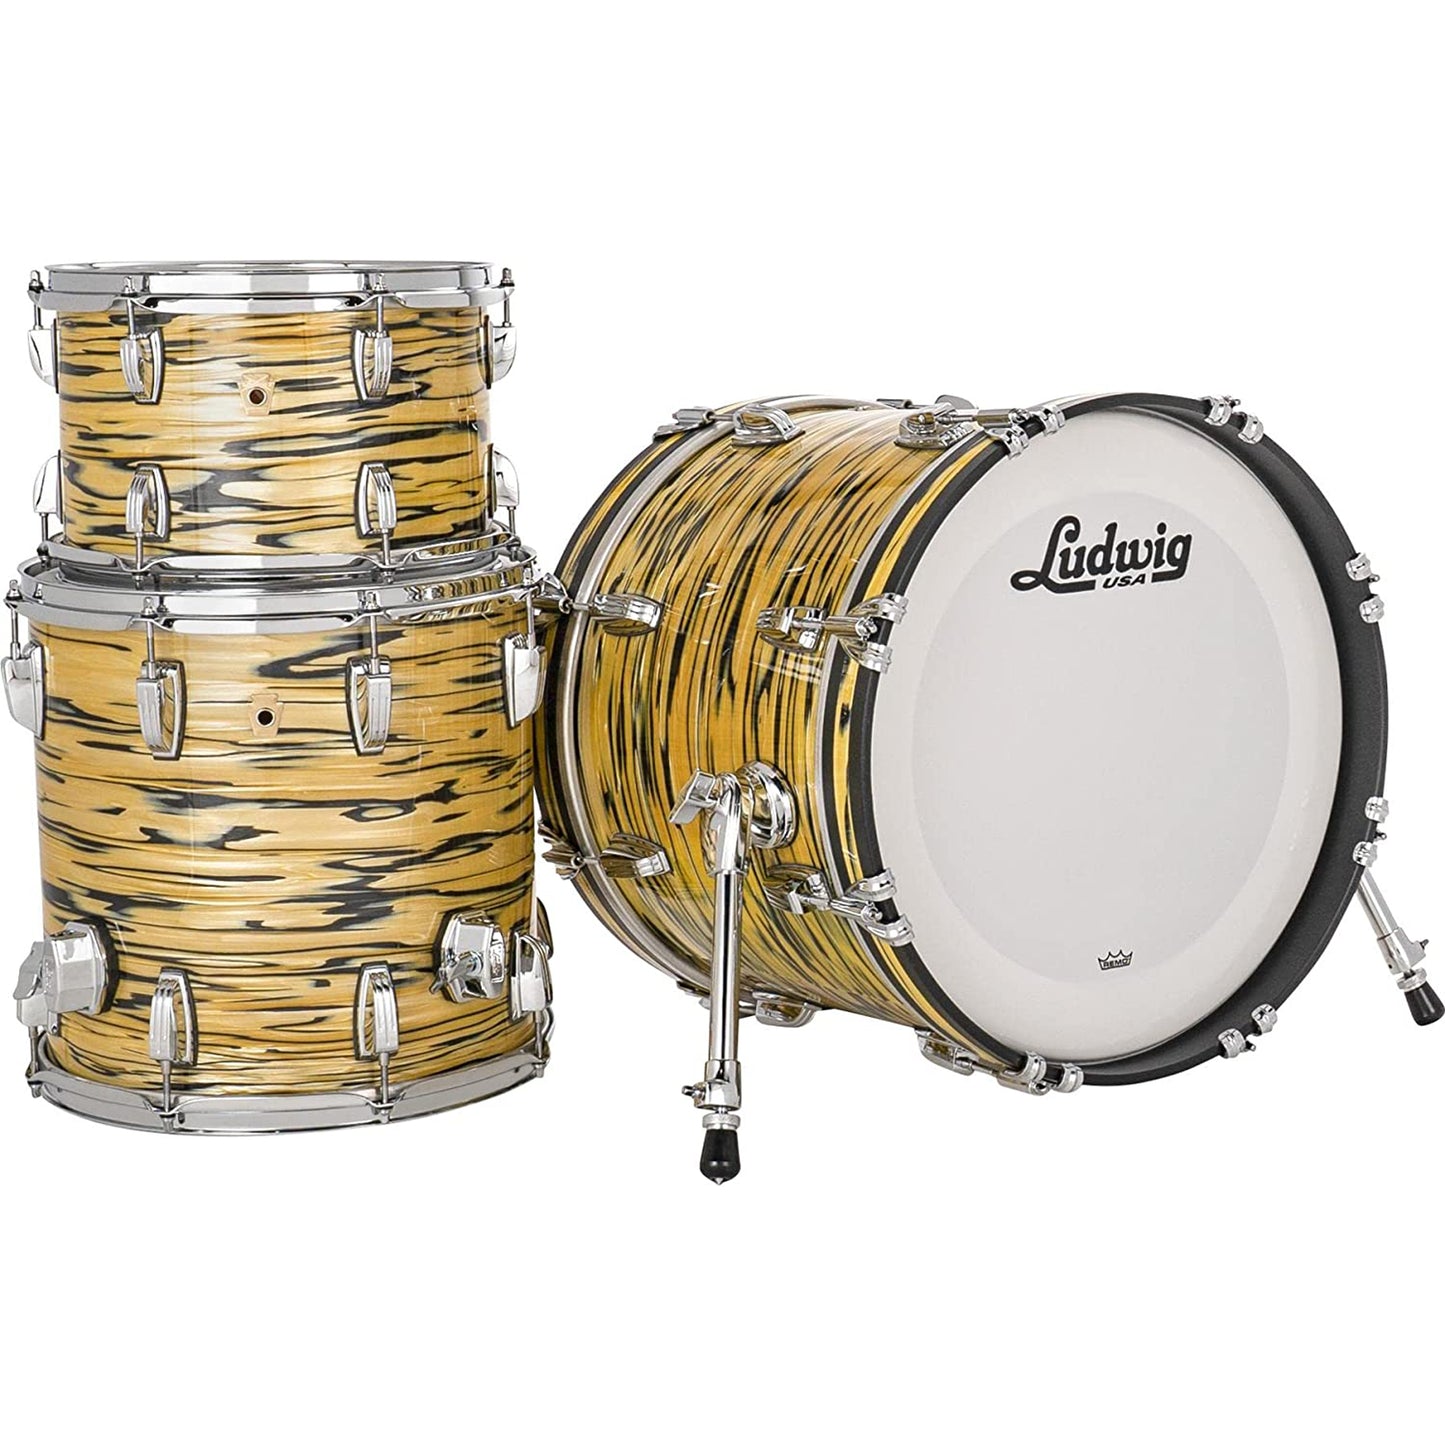 Ludwig Classic Maple 3-Piece Jazzette Shell Pack - Lemon Oyster